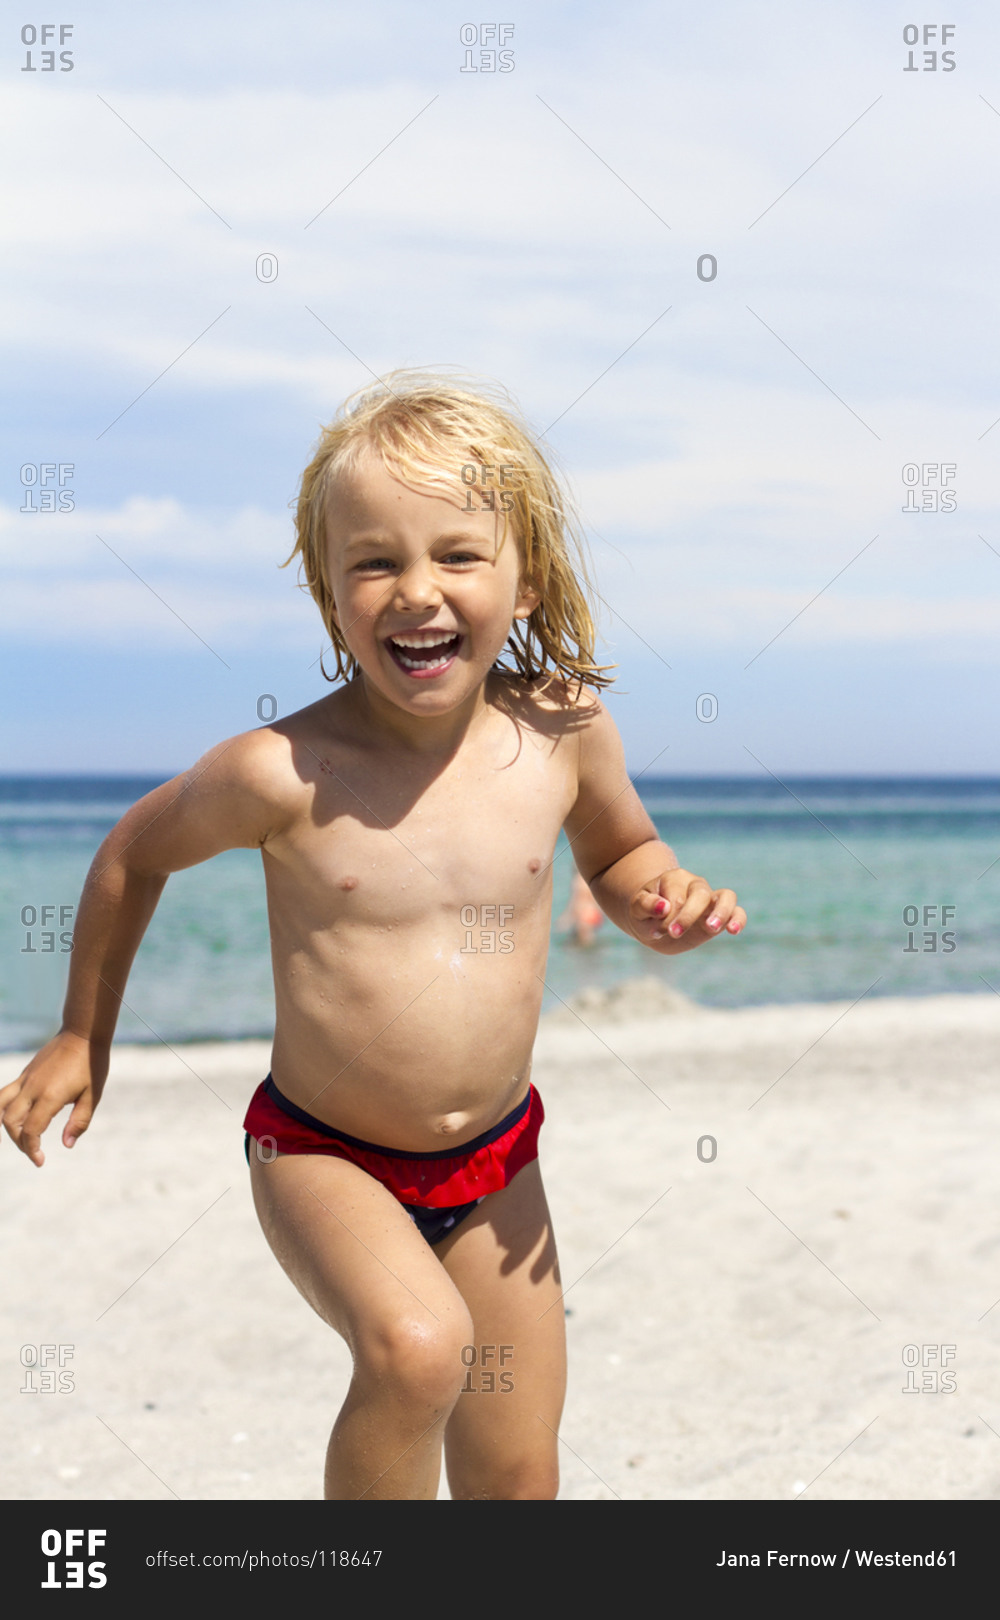 Portrait of a smiling little girl on the beach stock photo - OFFSET